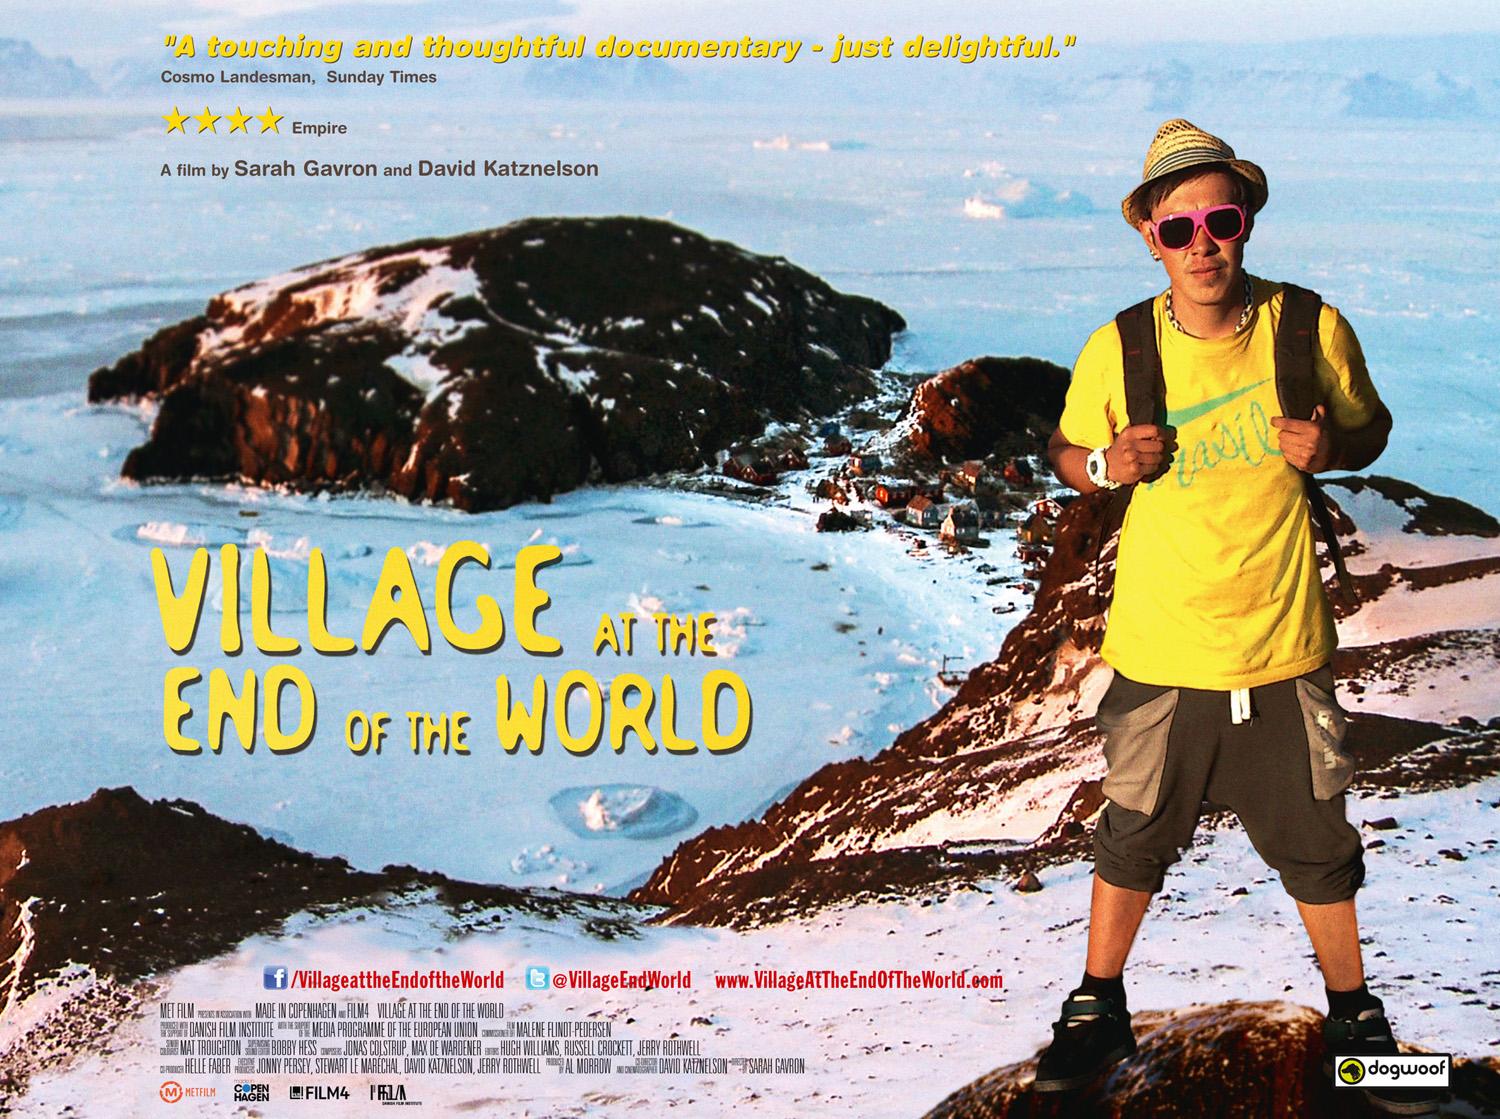 Village At The End Of The World (2012)